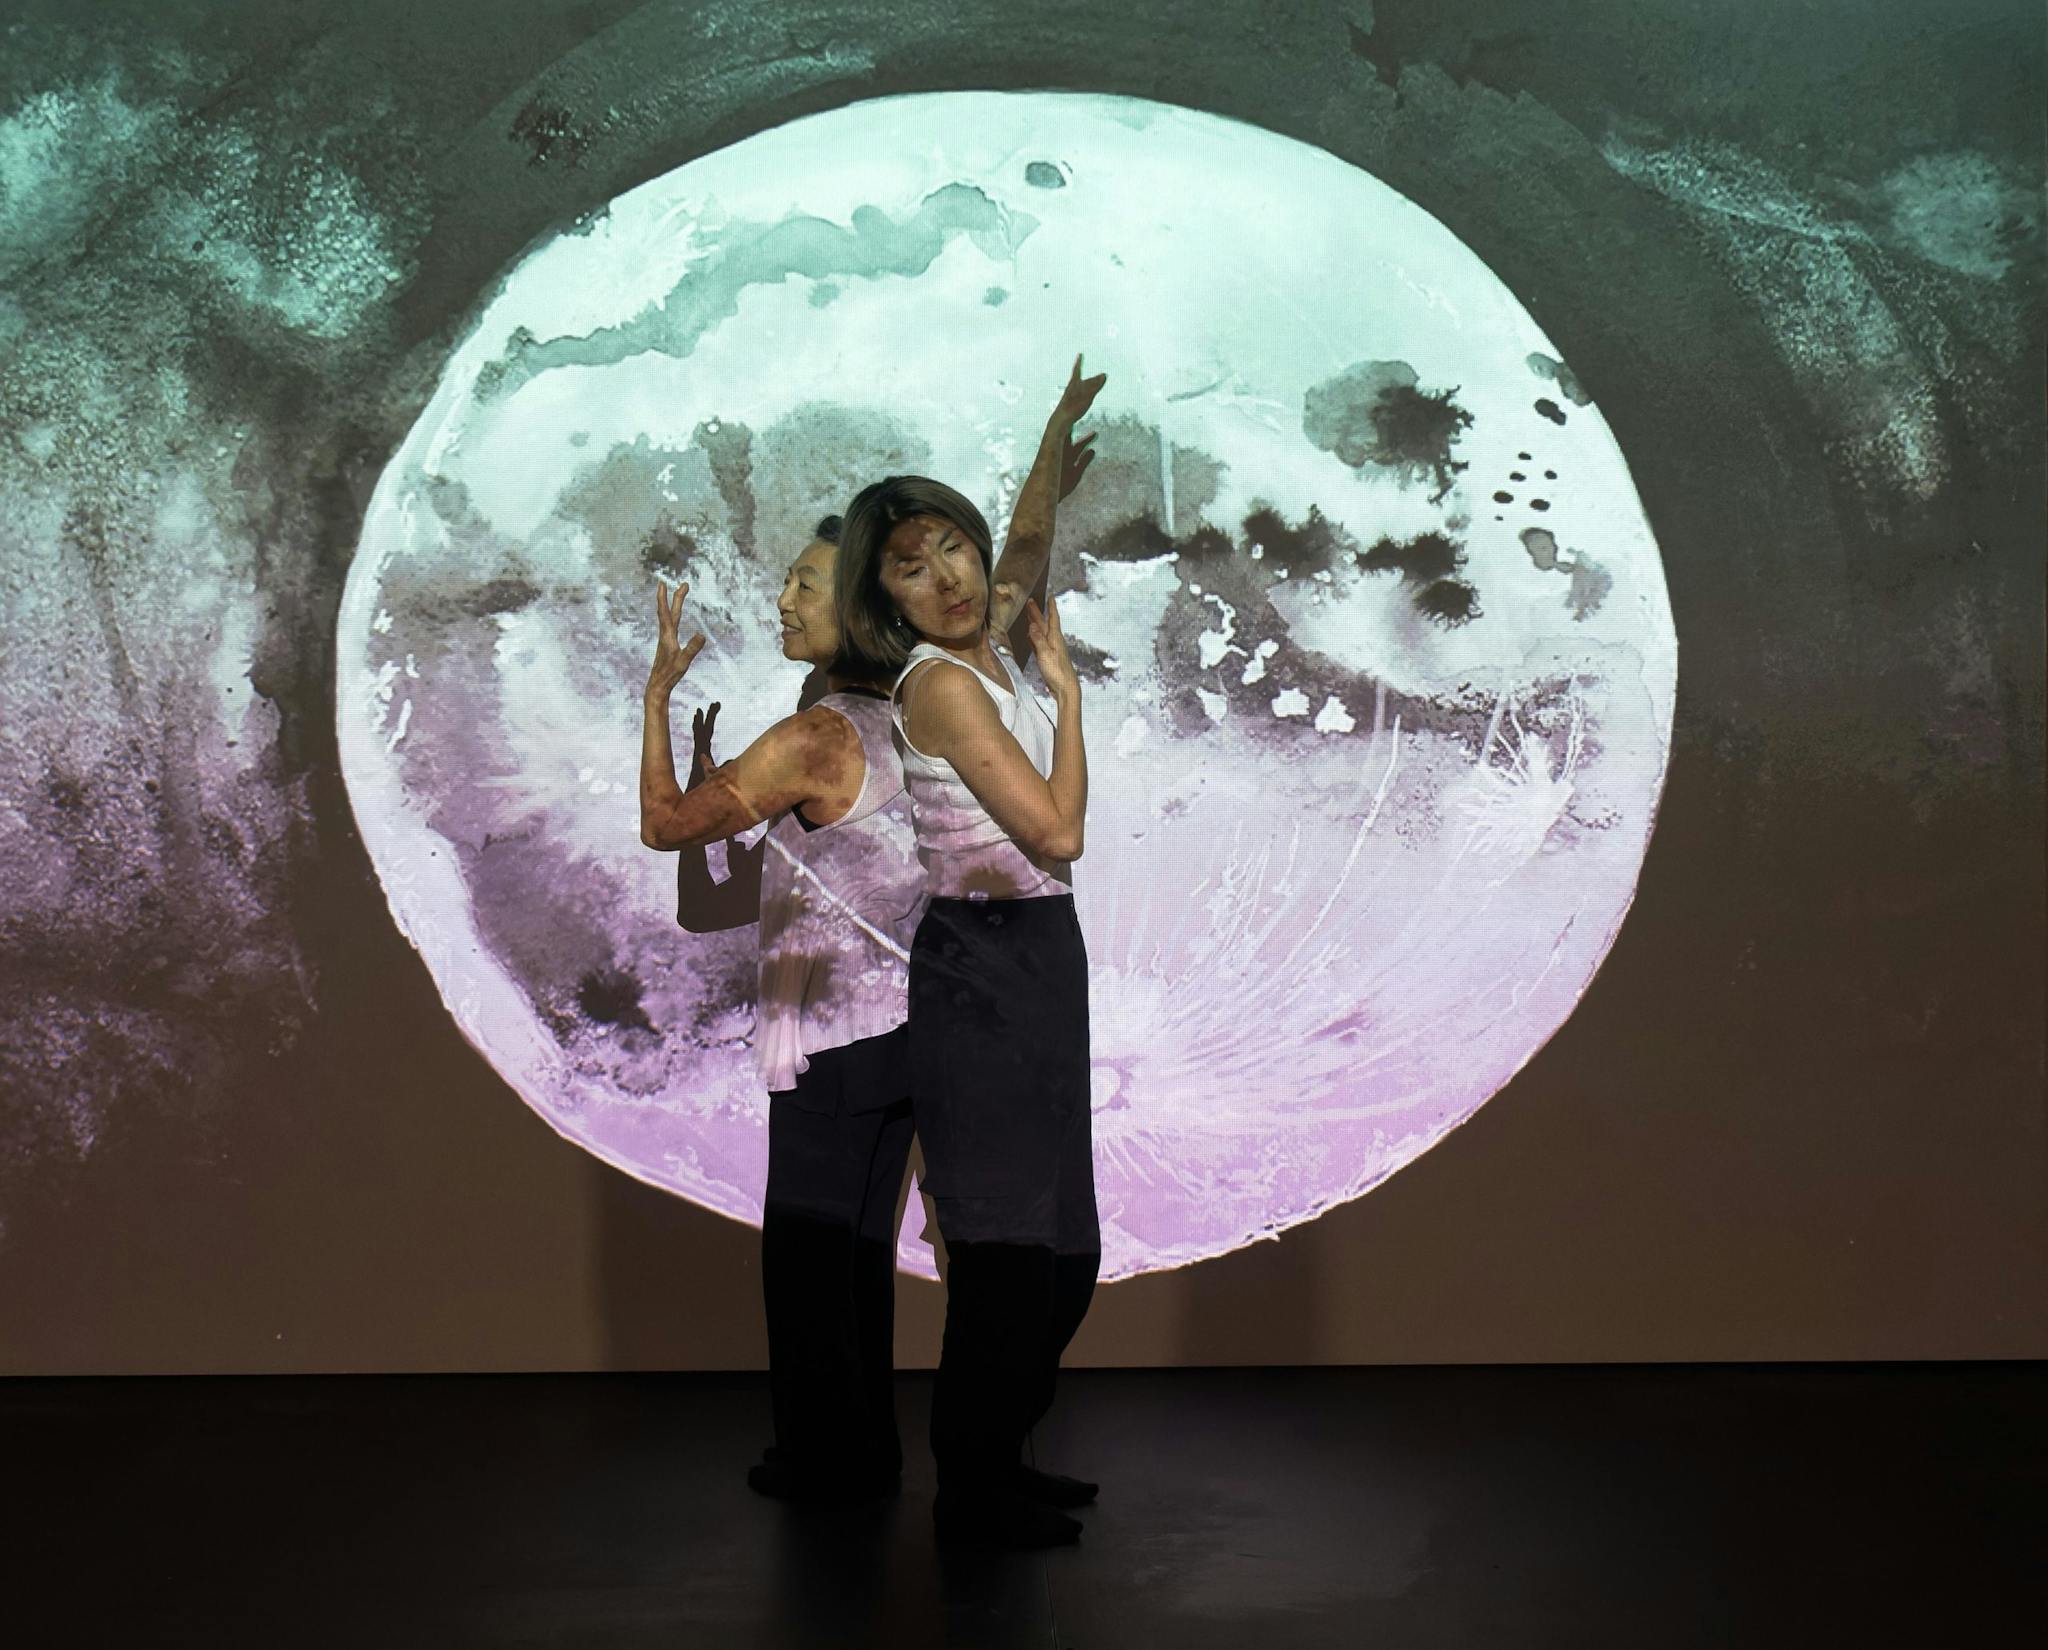 Fernadina Chan and Soyoung L. Kim perform in front of a full moon set against a dark sky.